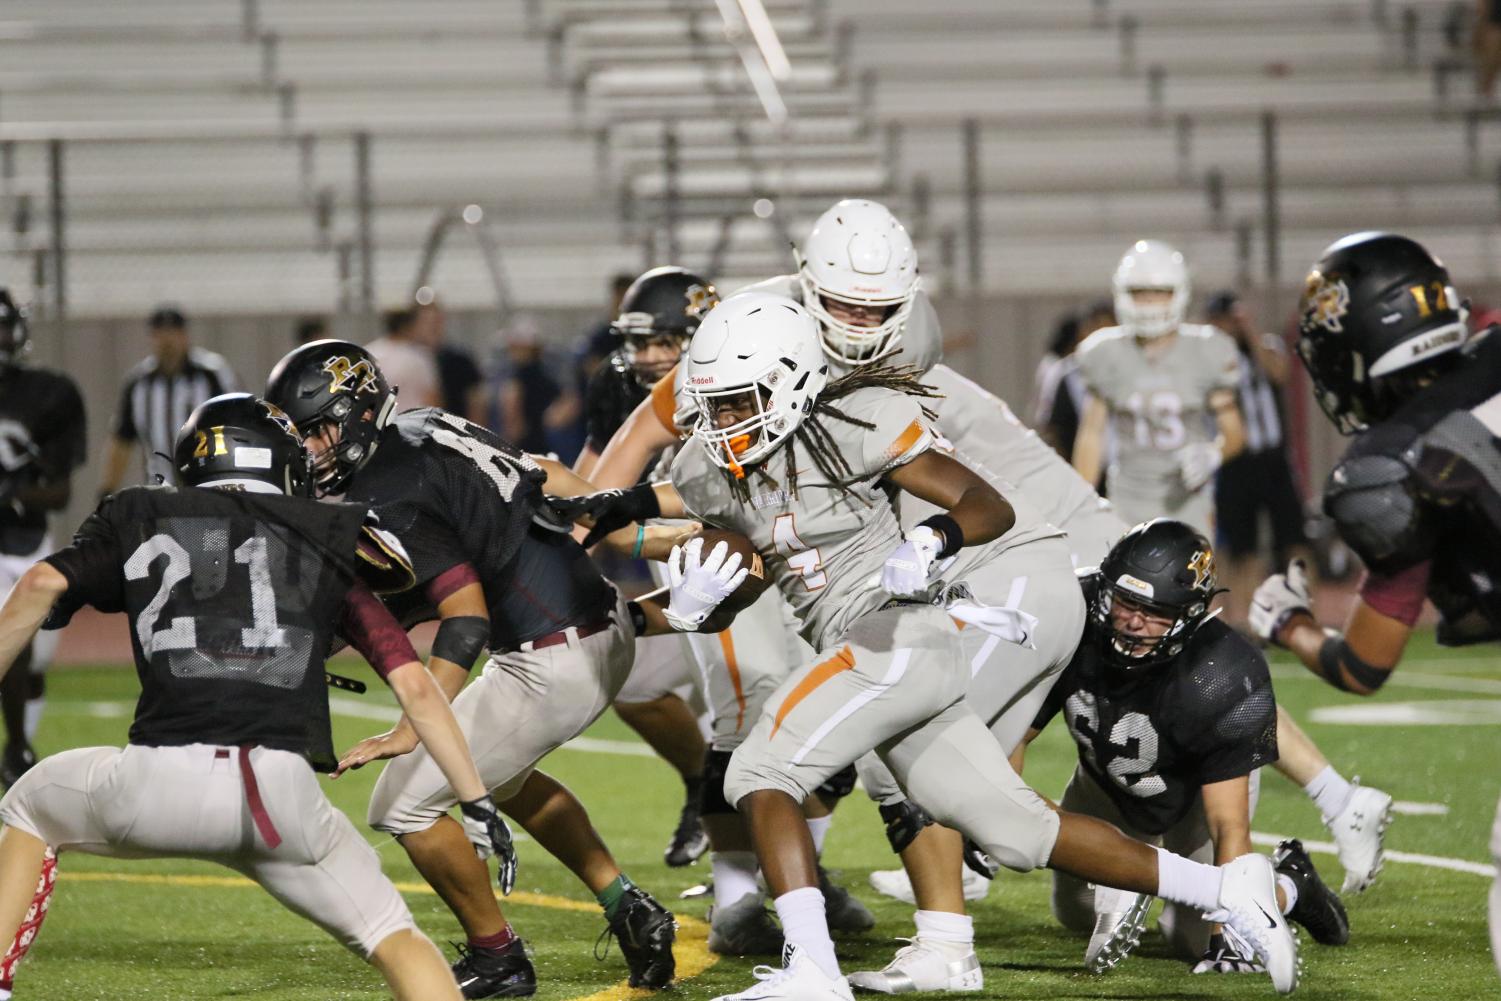 Varsity+Football+Faces+Off+Against+Rouse+Raiders+In+Scrimmage